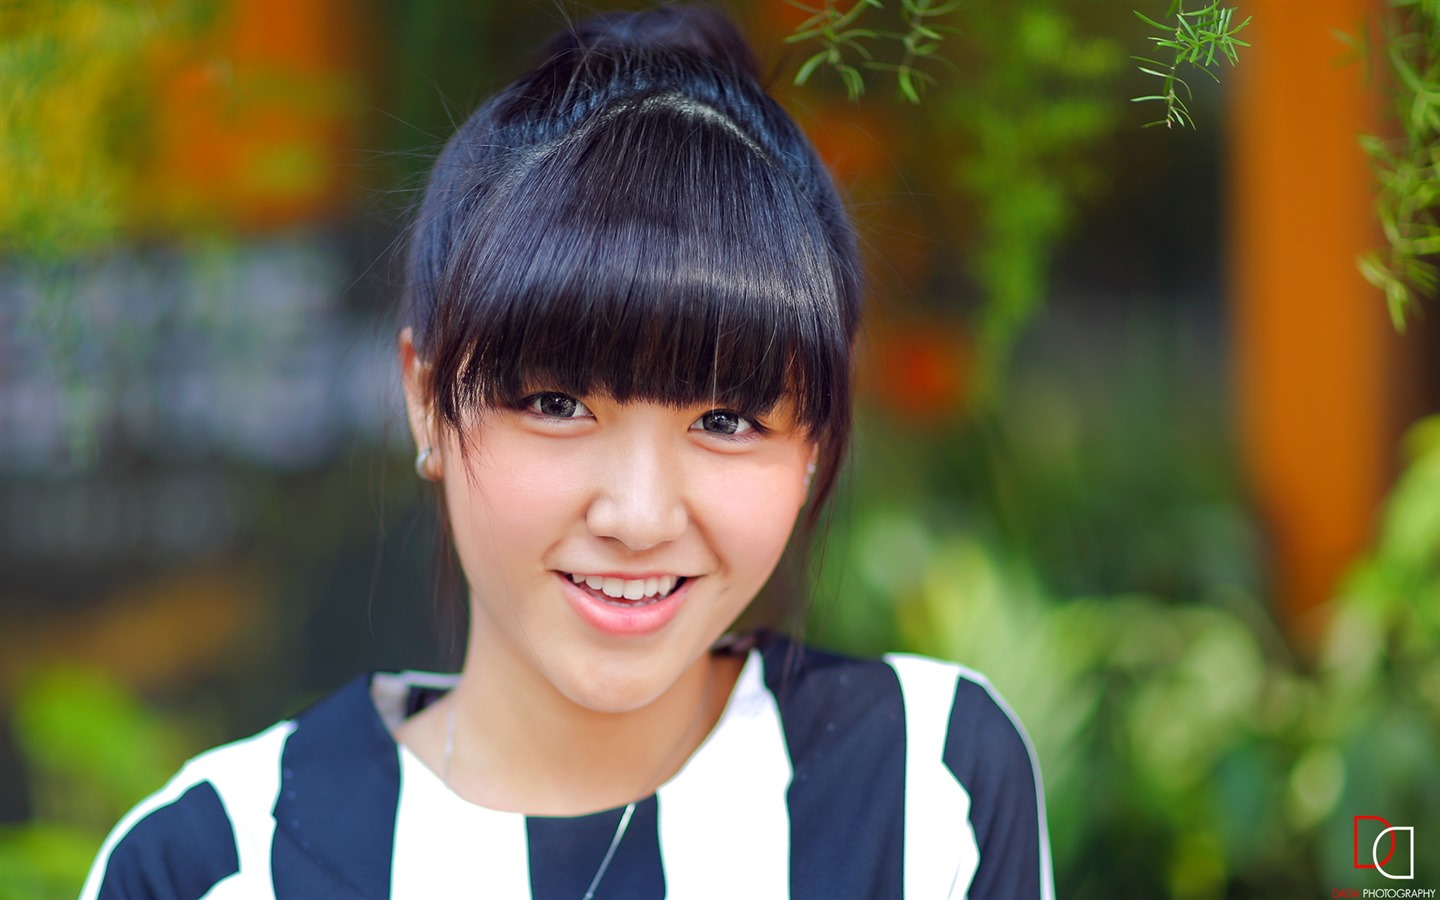 Pure and lovely young Asian girl HD wallpapers collection (4) #37 - 1440x900